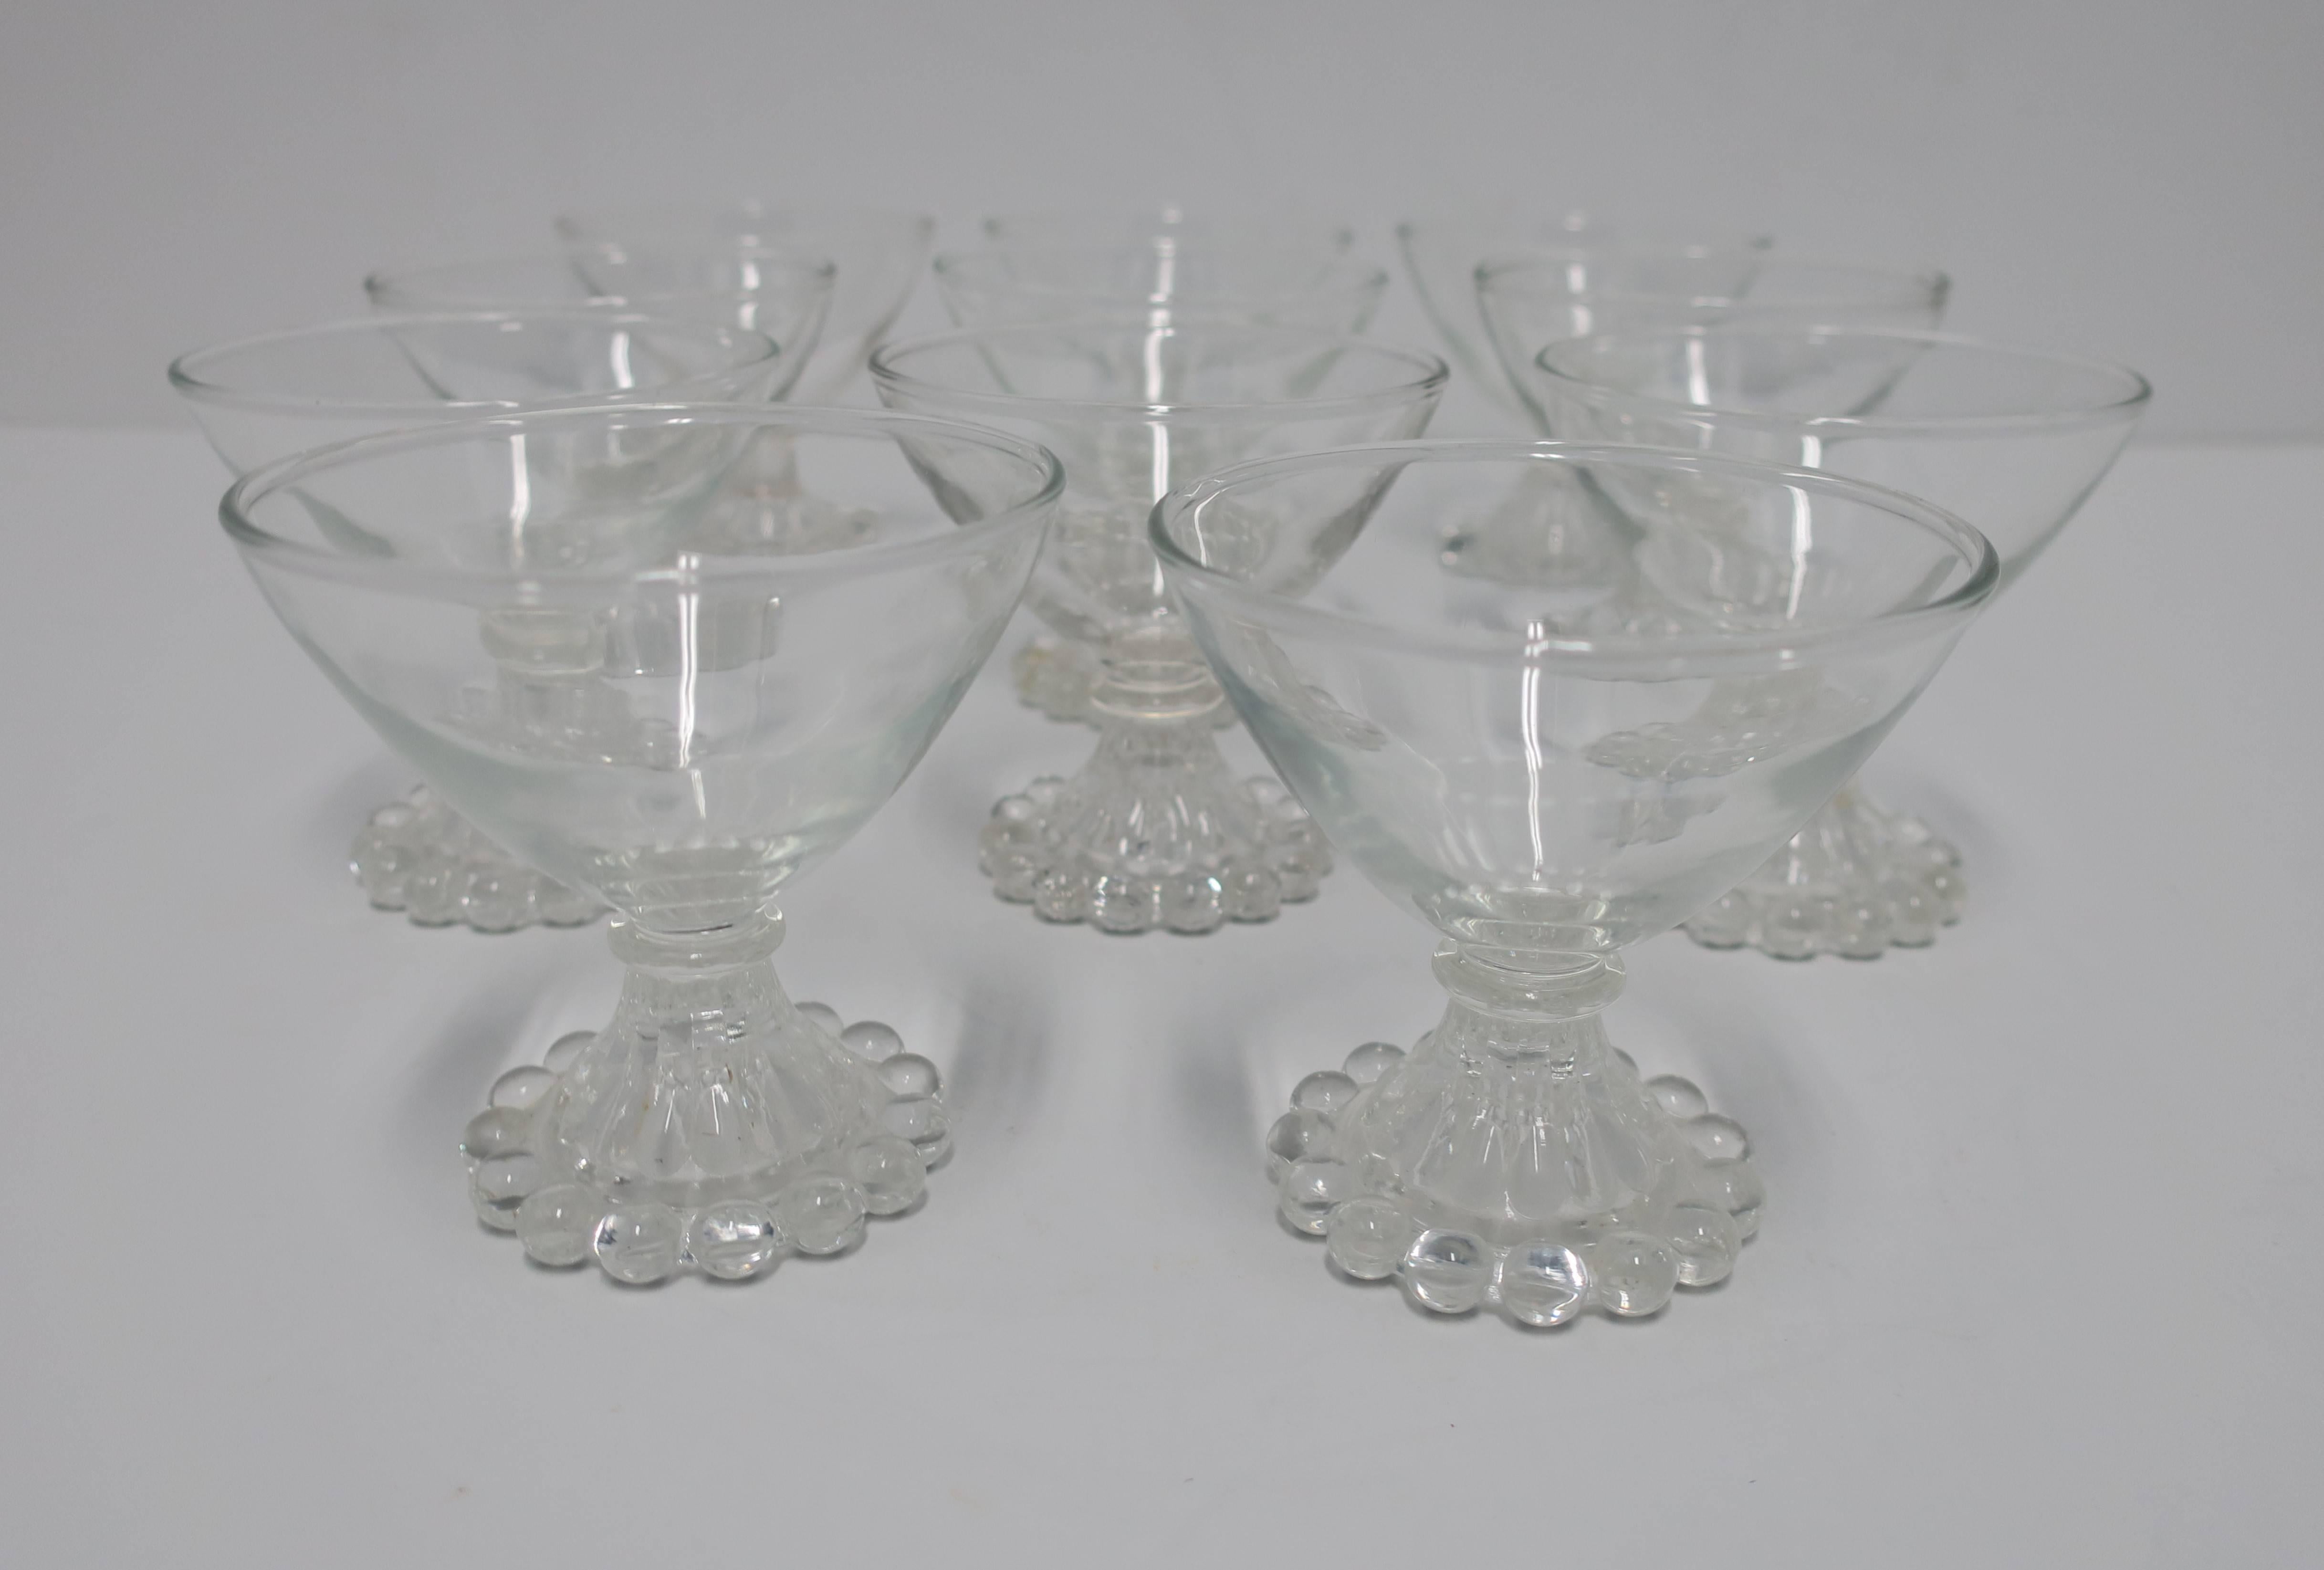 A beautiful set of 12 cocktail or champagne glasses with decorative base, circa early 20th century. Glasses could also be used to serve dessert. A great set for summer or holiday entertaining. 

Each measure: 3.5